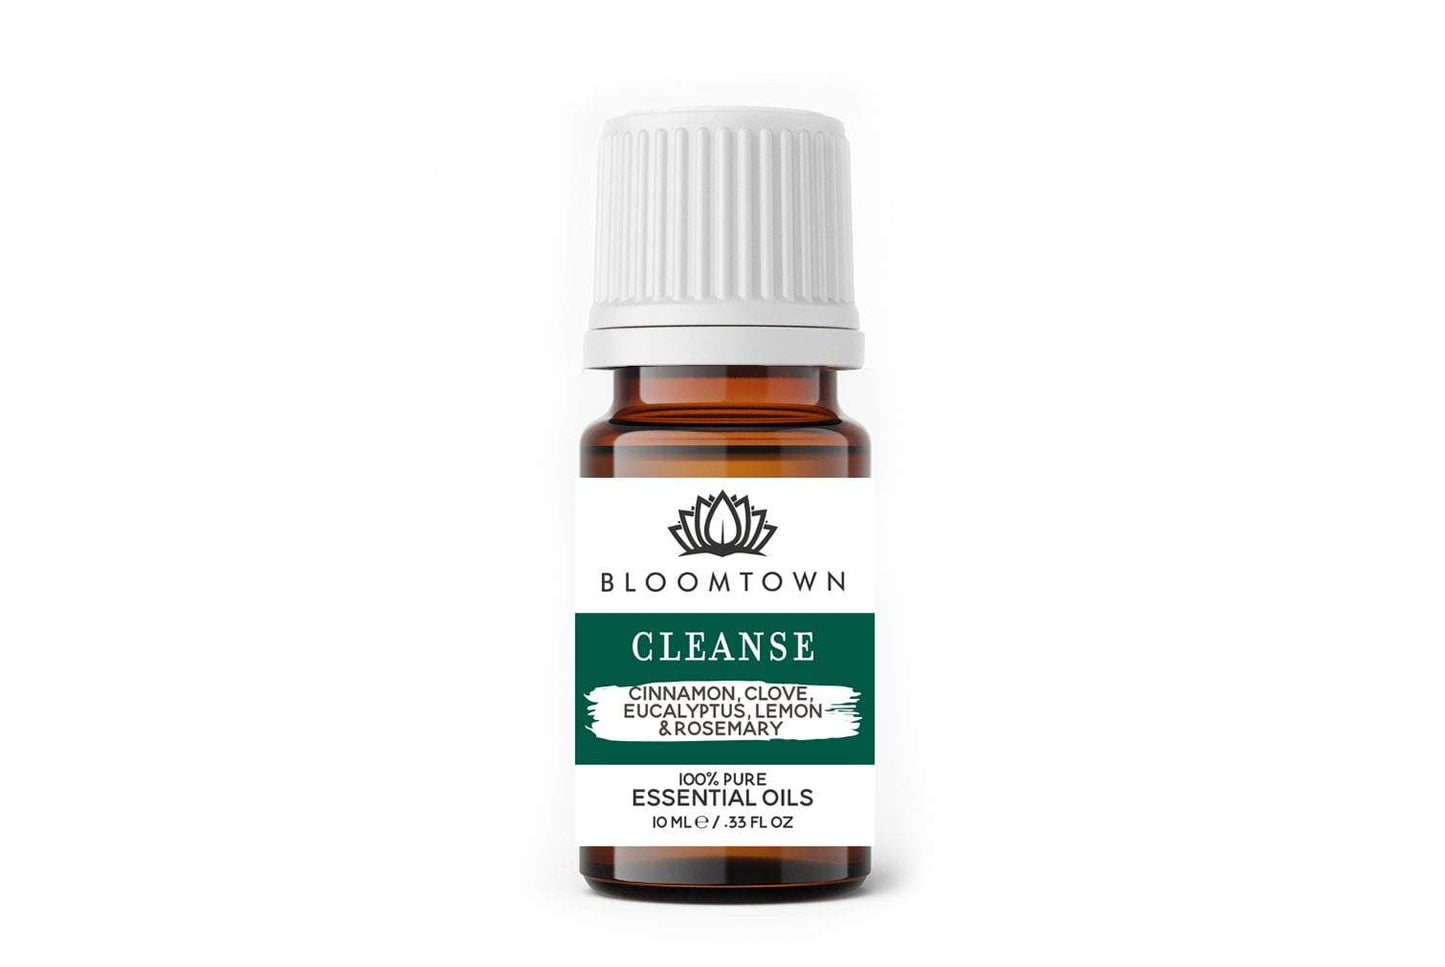 Bloomtown The Cleanse Essential Oil | Cinnamon, Clove, Lemon, Eucalyptus and Rosemary | Vegan | Sustainable | Cruelty Free | Natural | Palm Oil Free